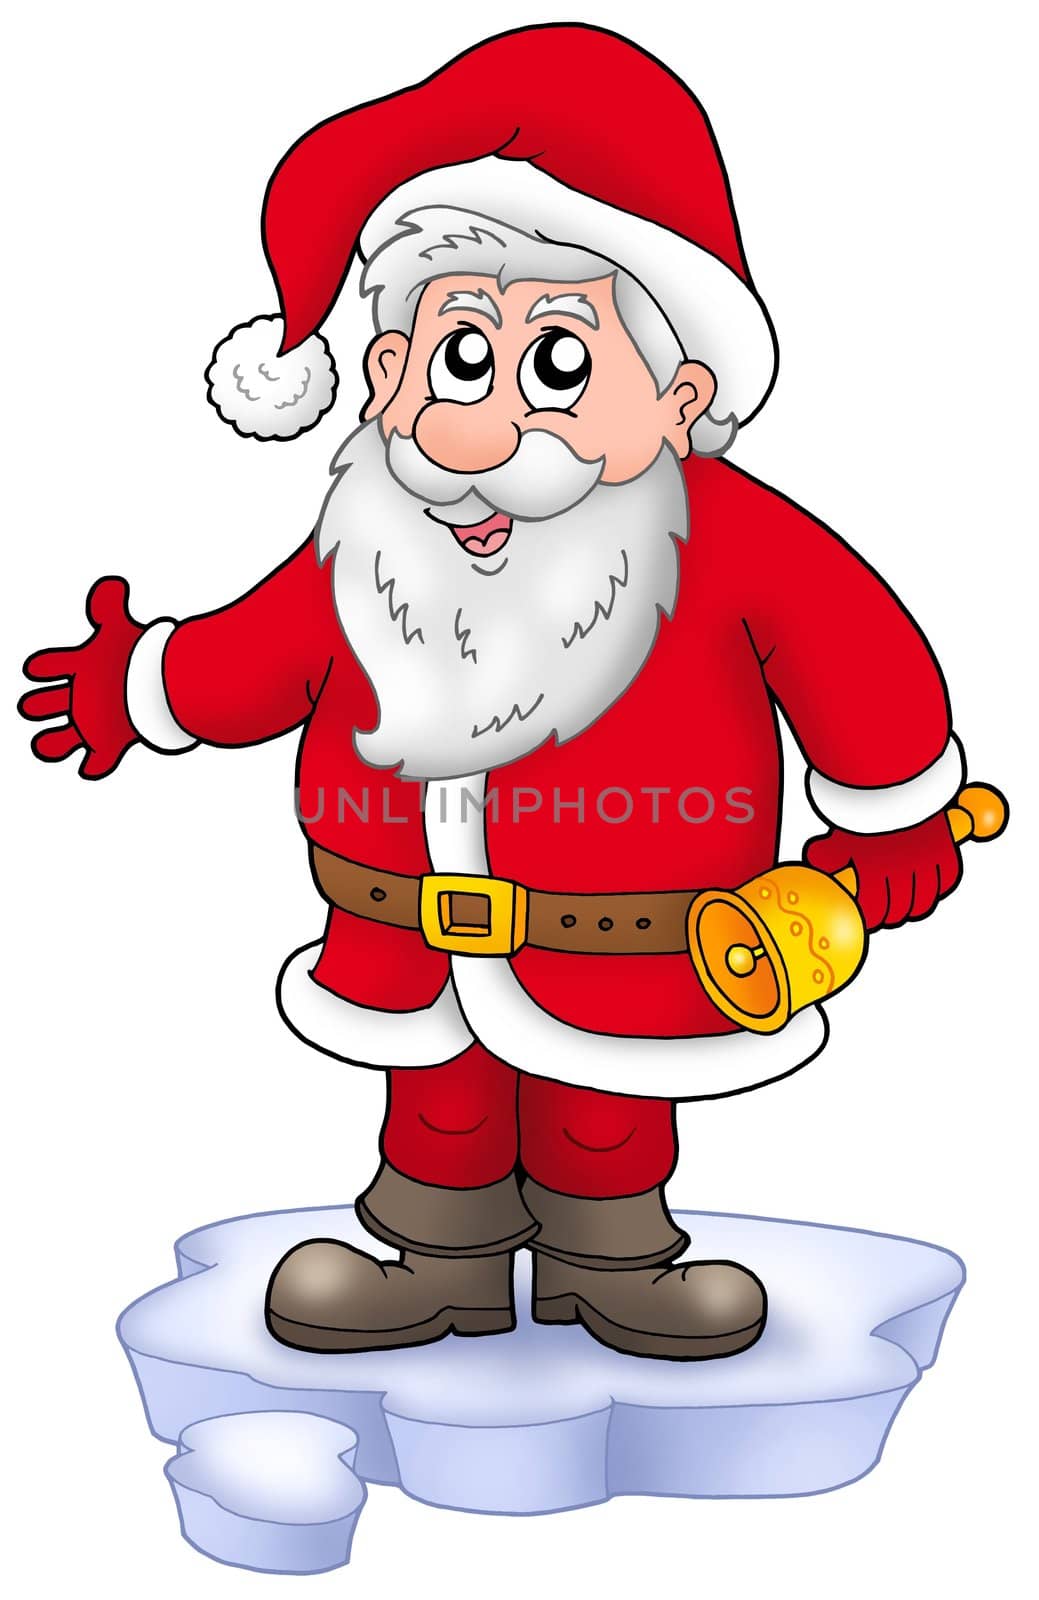 Cute Santa Claus with bell on snow - color illustration.